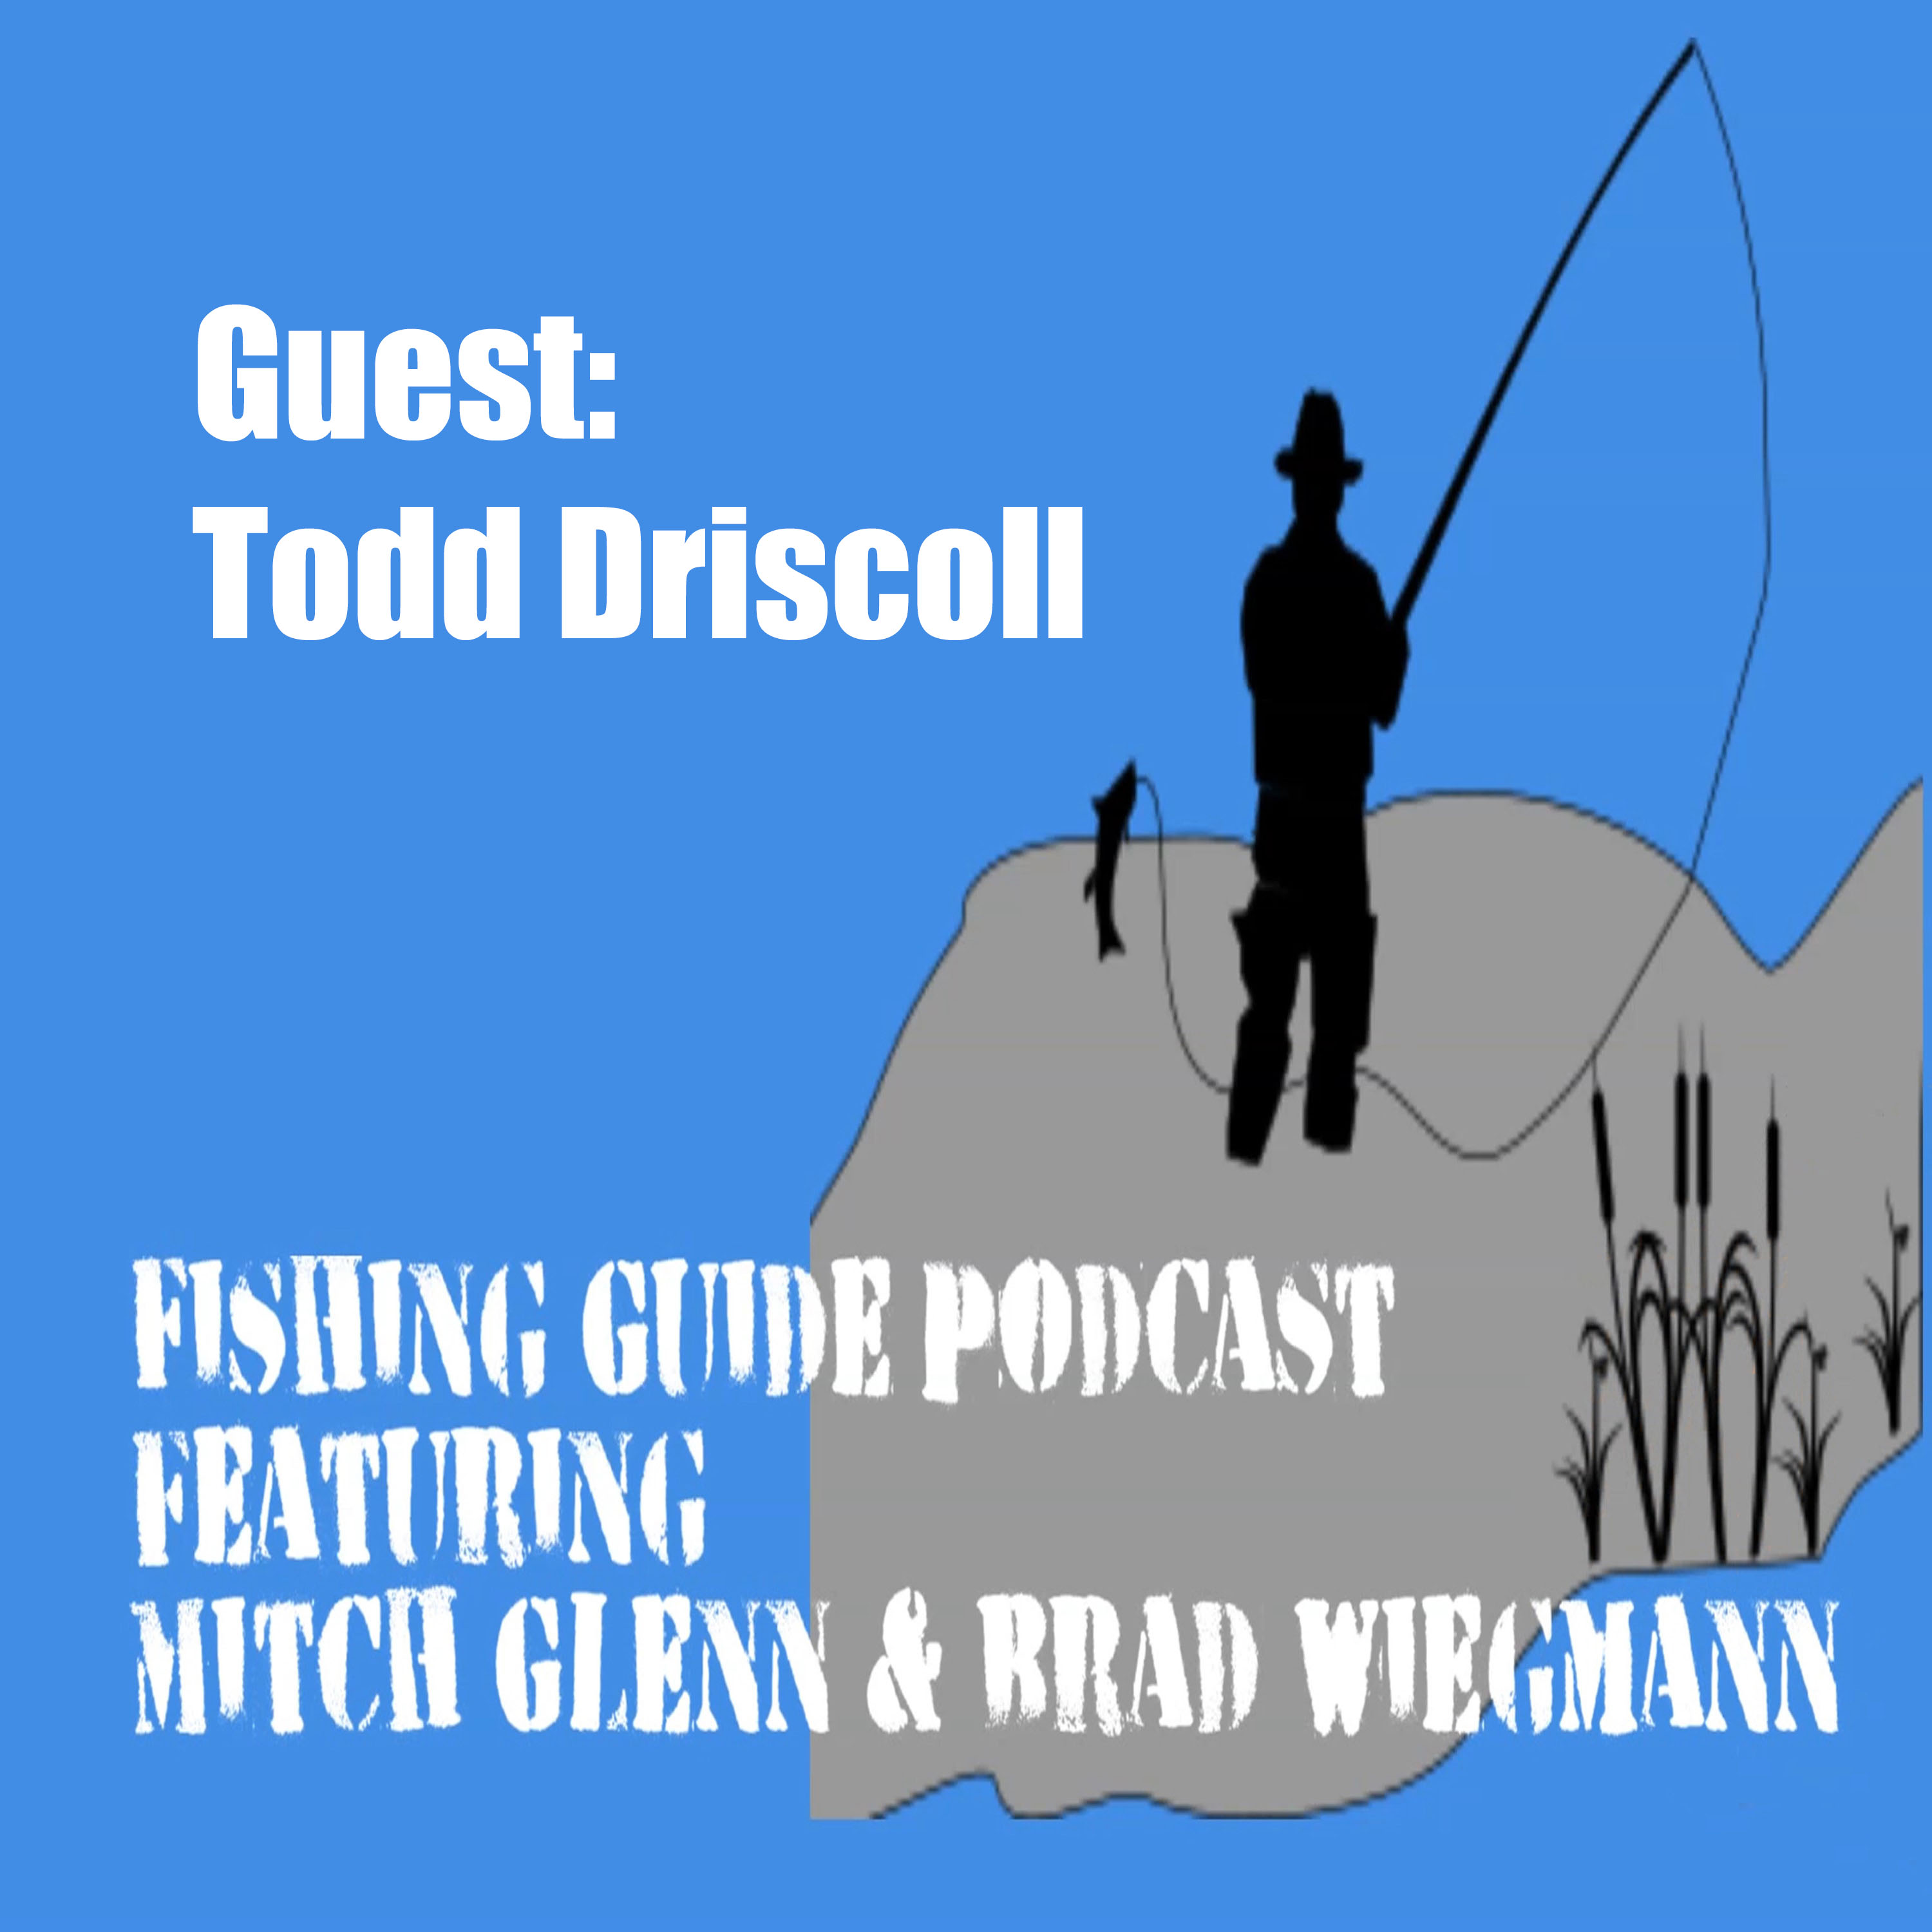 Todd Driscoll Garmin Pro Staffer talks about LiveScope and Perspective Mode